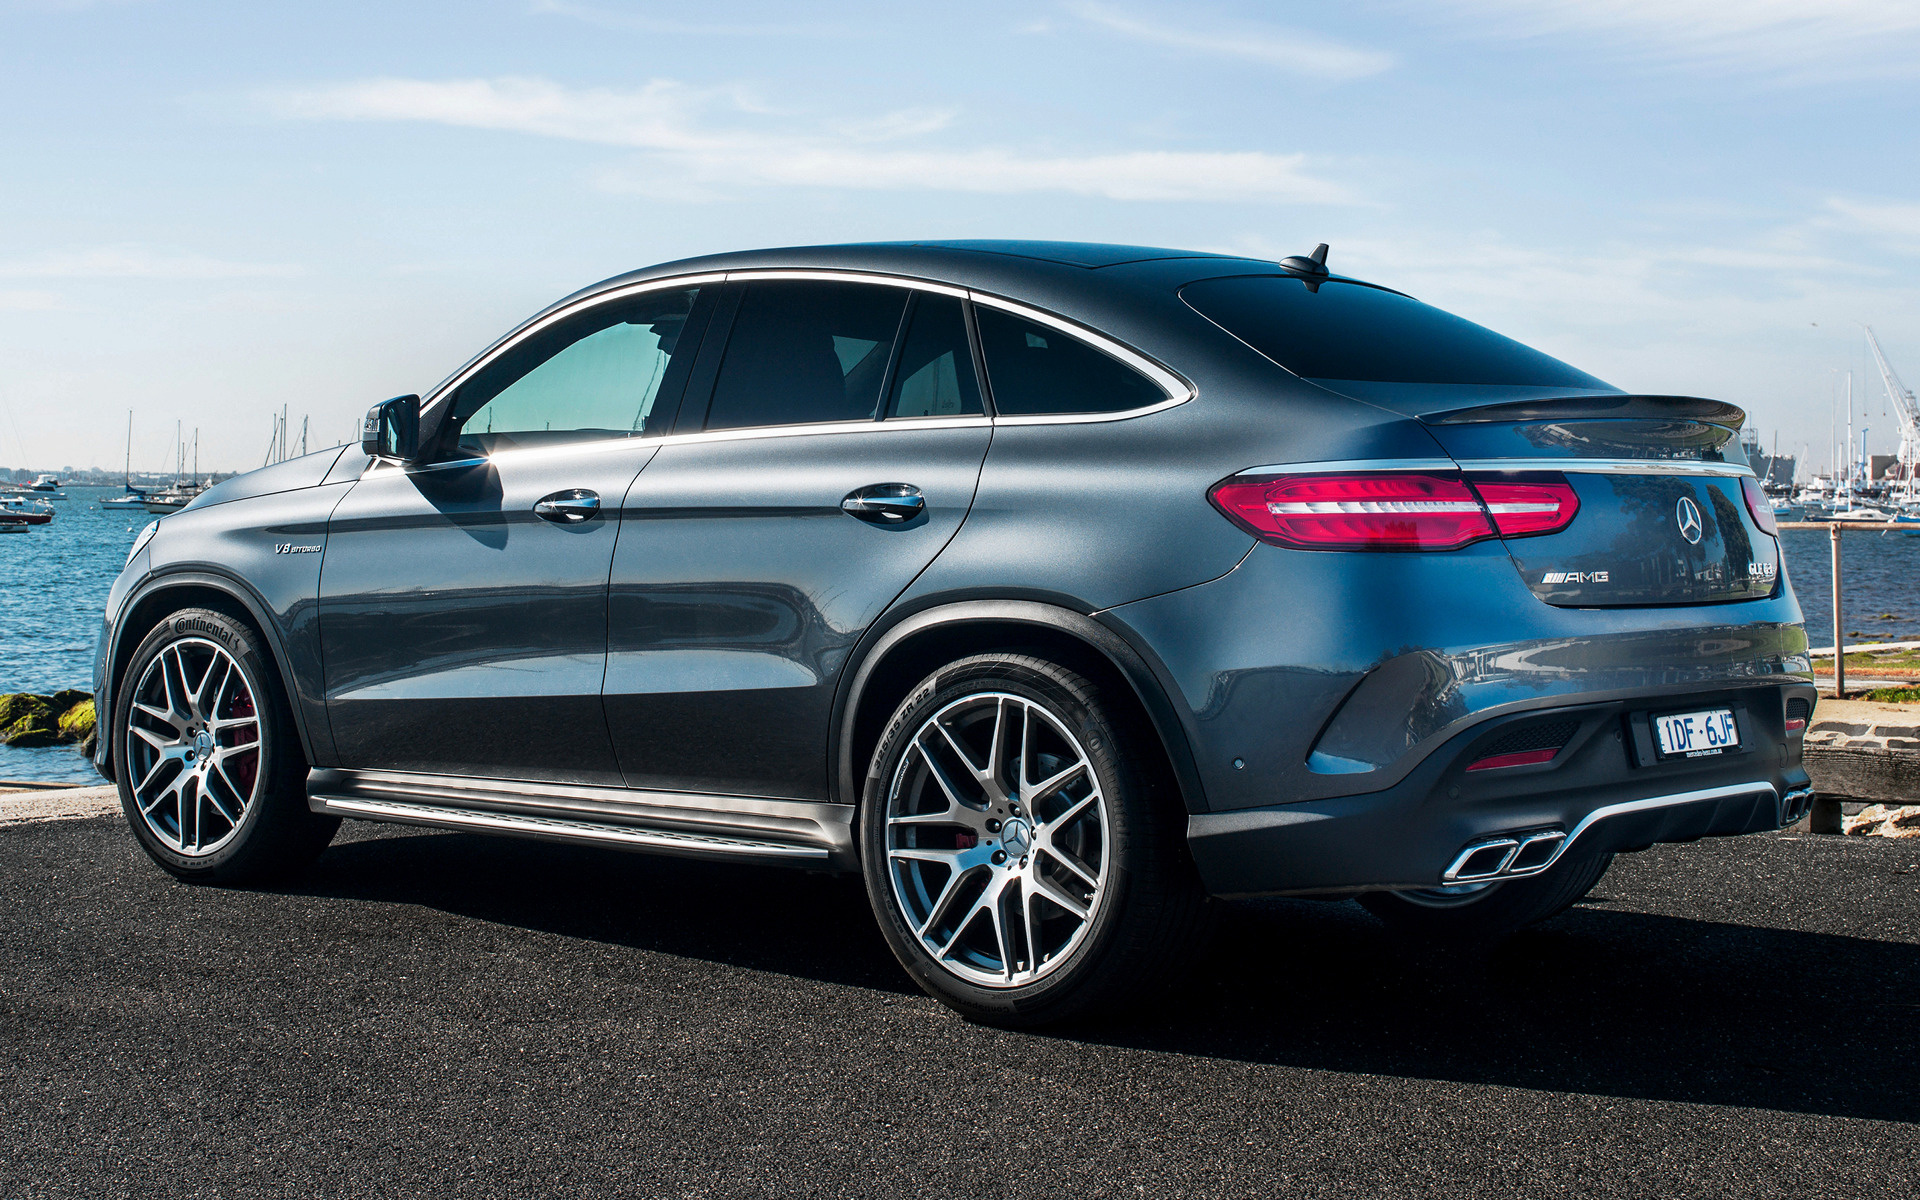 Free Download 15 Mercedes Amg Gle 63 S Coupe Au Wallpapers And Hd Images 19x10 For Your Desktop Mobile Tablet Explore 32 Mercedes Benz Gle Wallpapers Mercedes Benz Gle Wallpapers Mercedes Benz